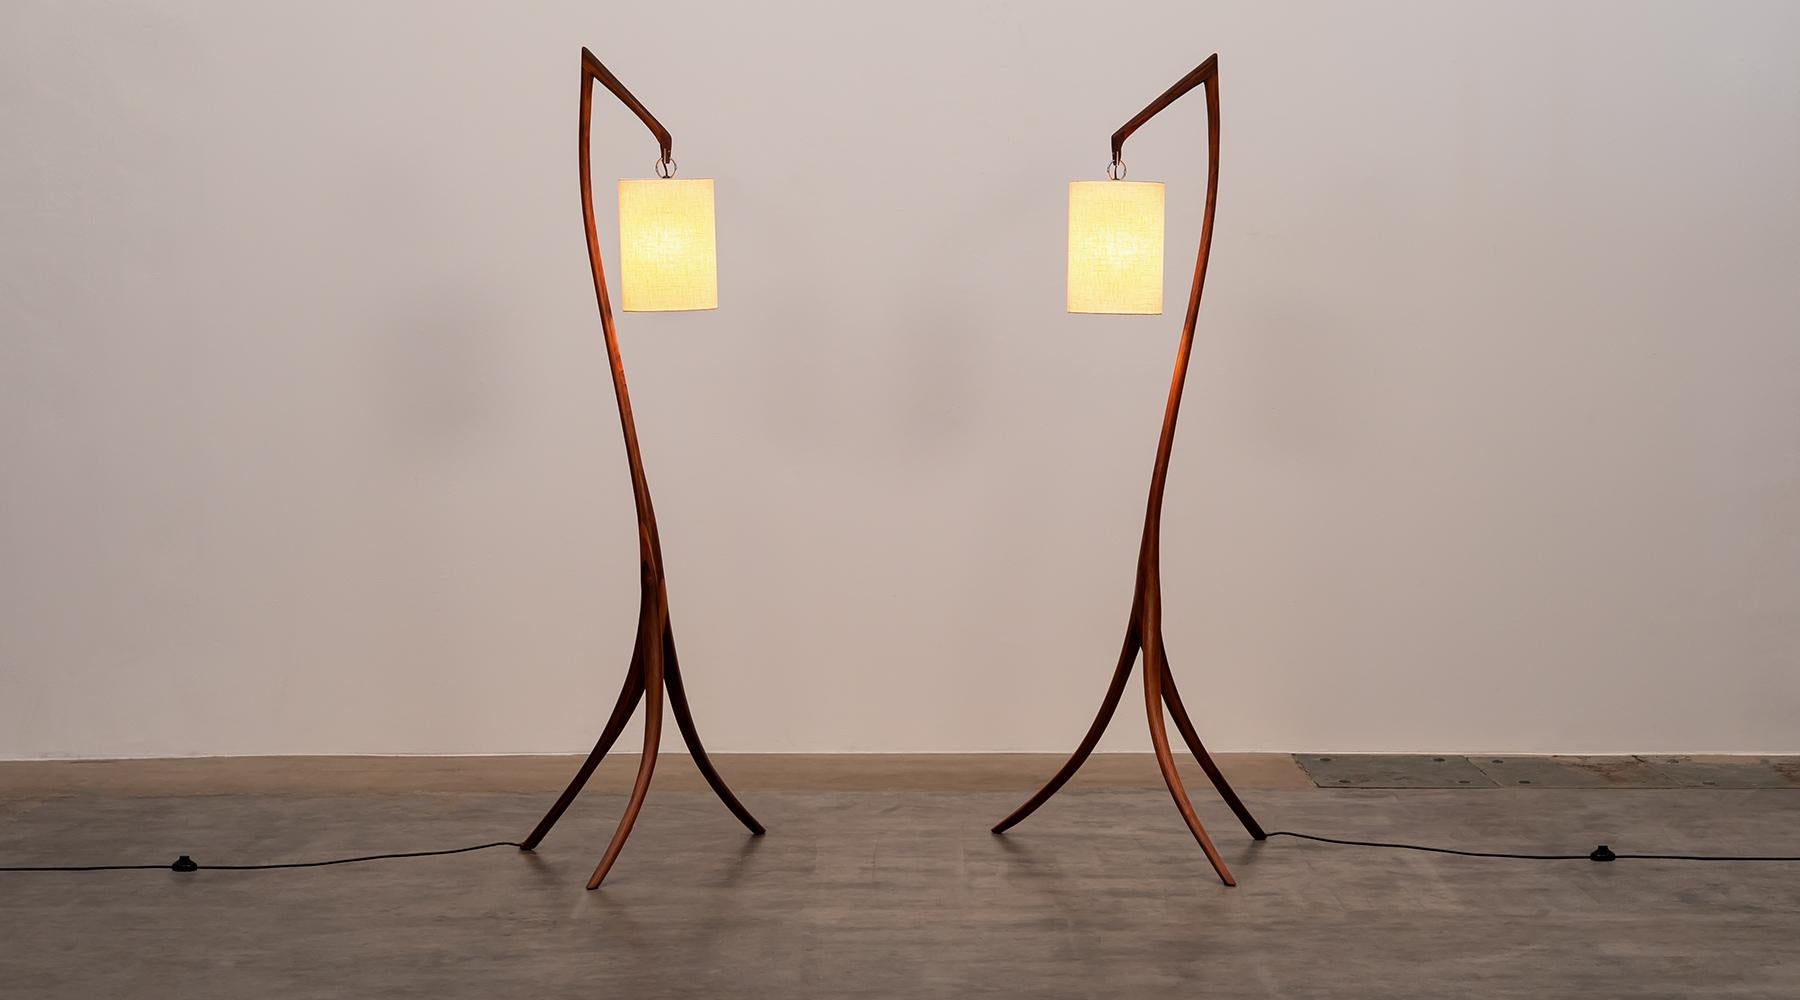 Matching floor lamps, walnut, linen, USA, 1960.

Glamorous and simply sculptural pair of floor lamps from 1960s. The beautifully curved feet and the pole are made of walnut. The pair not only exhibits an elegance, but also artful craftsmanship